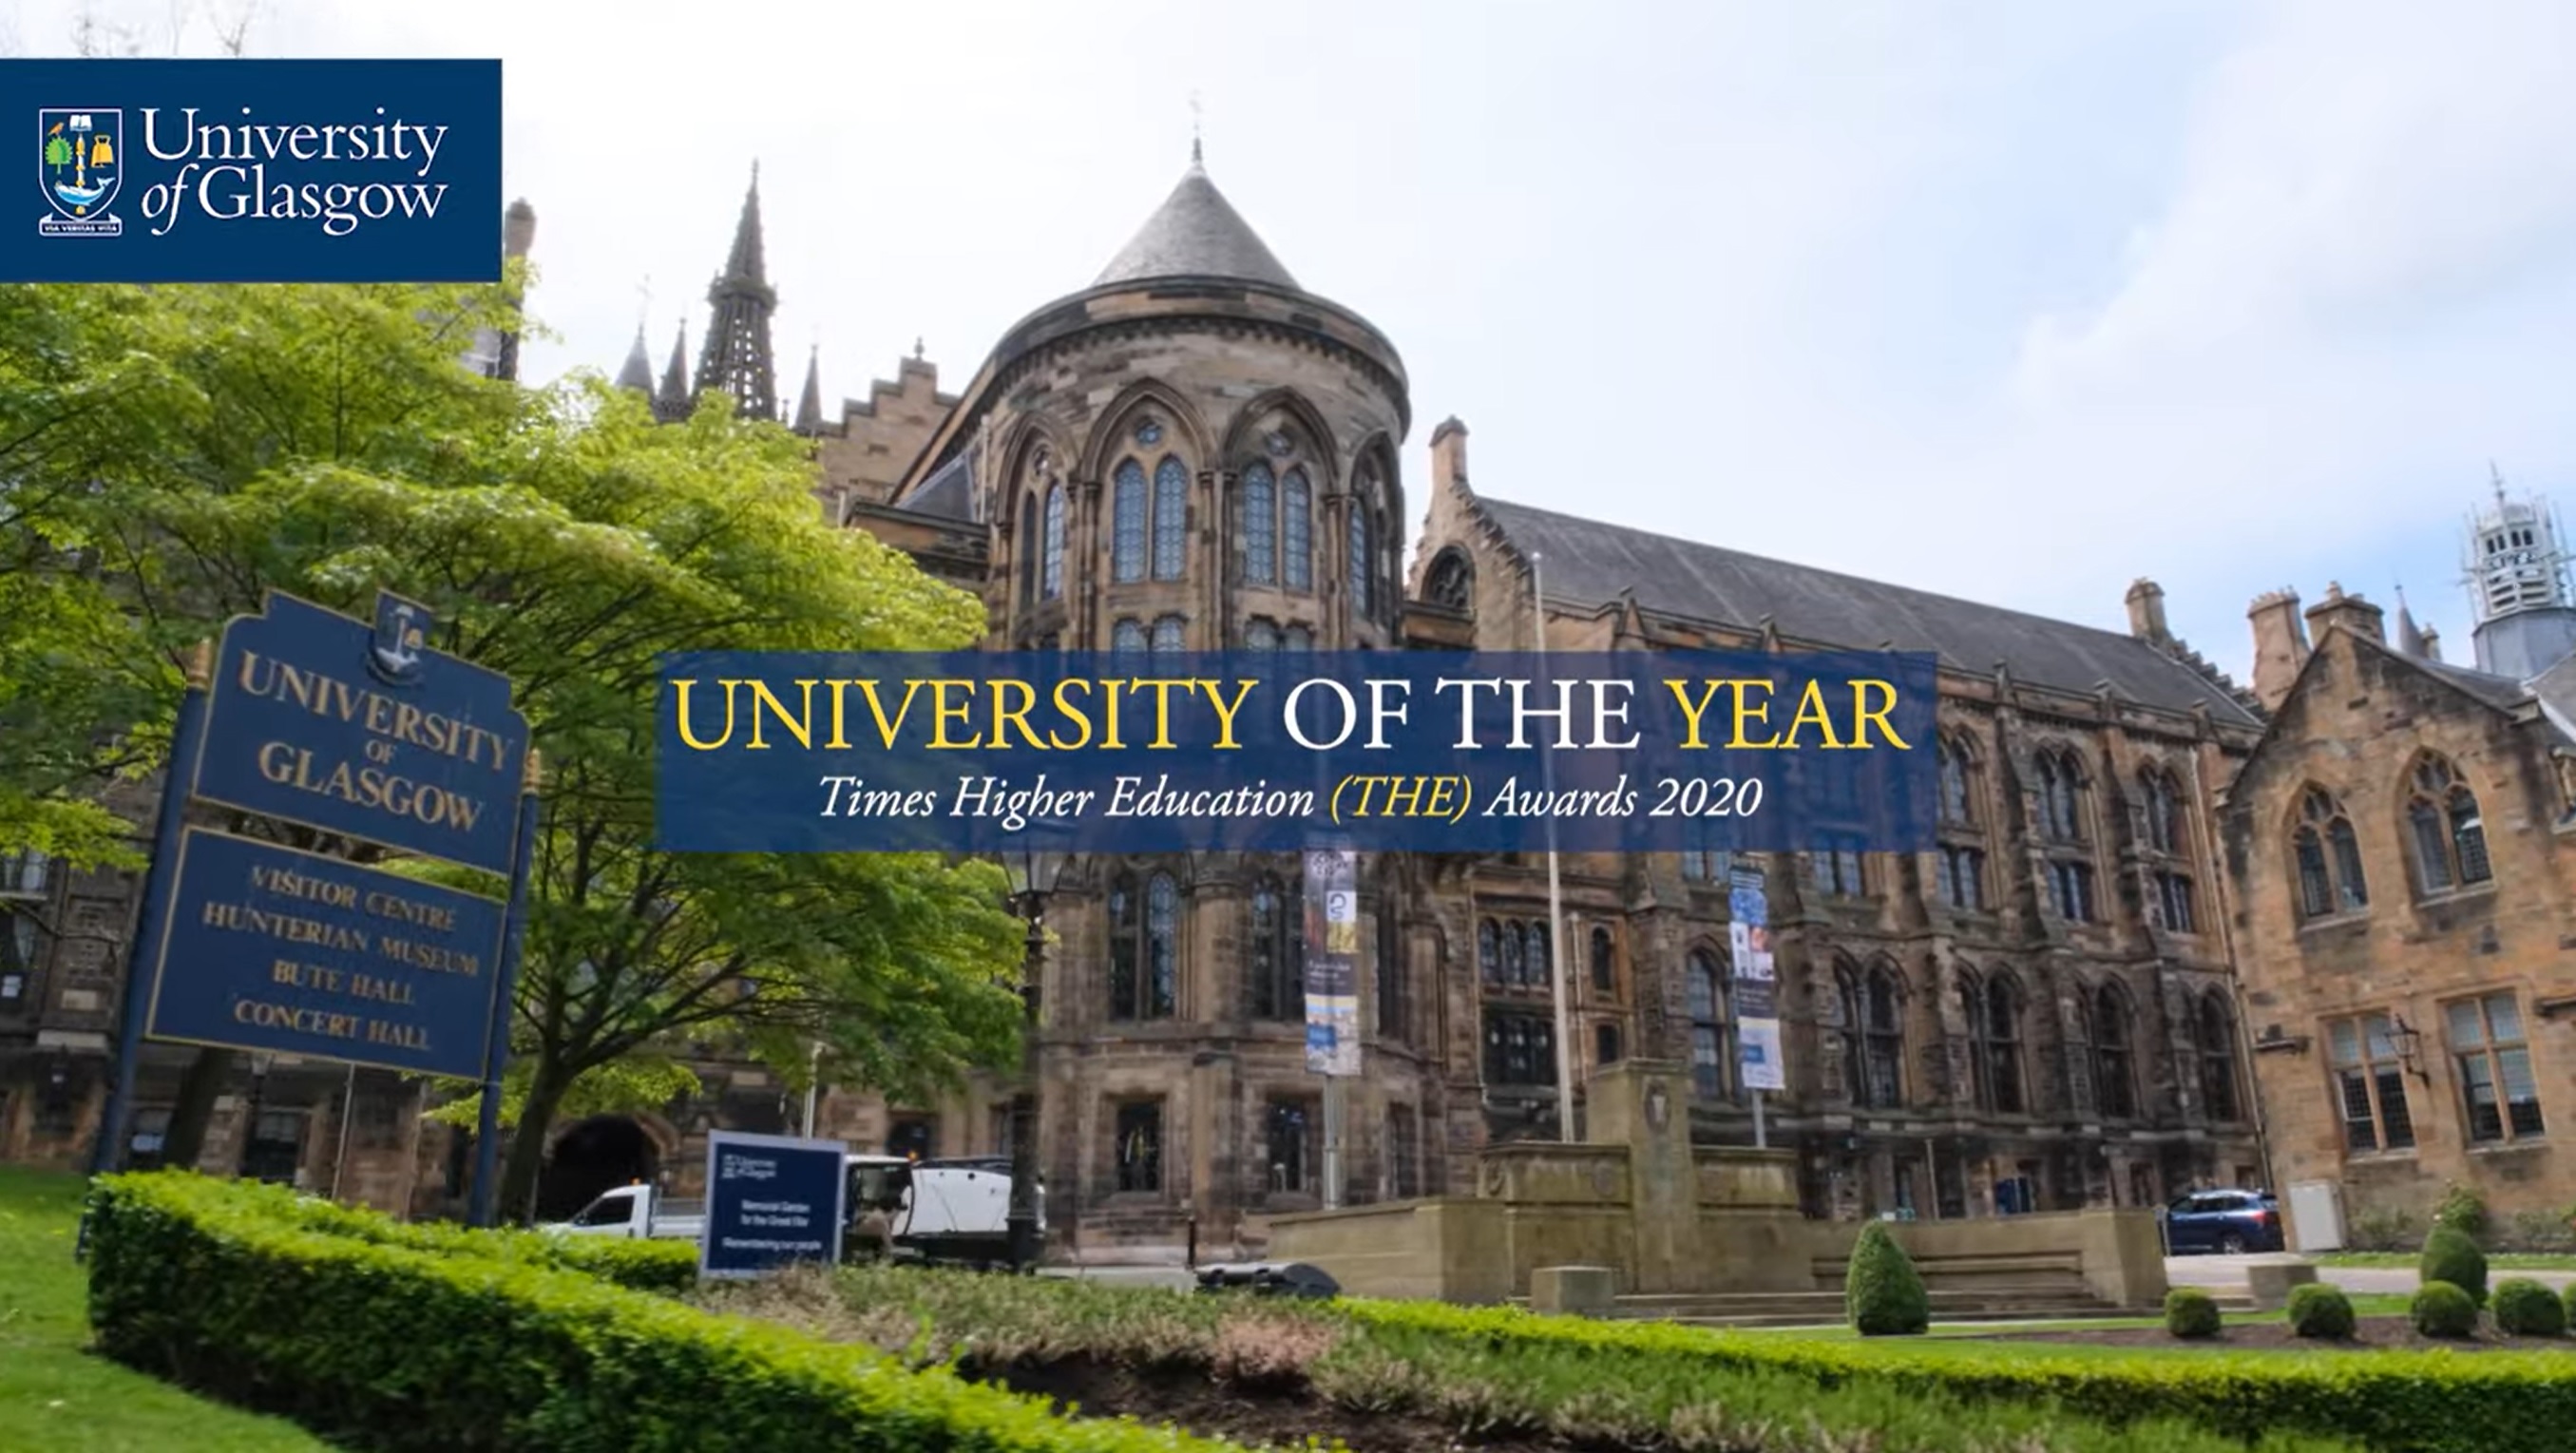 Thumbnail image of THE University video - detailing University of the year